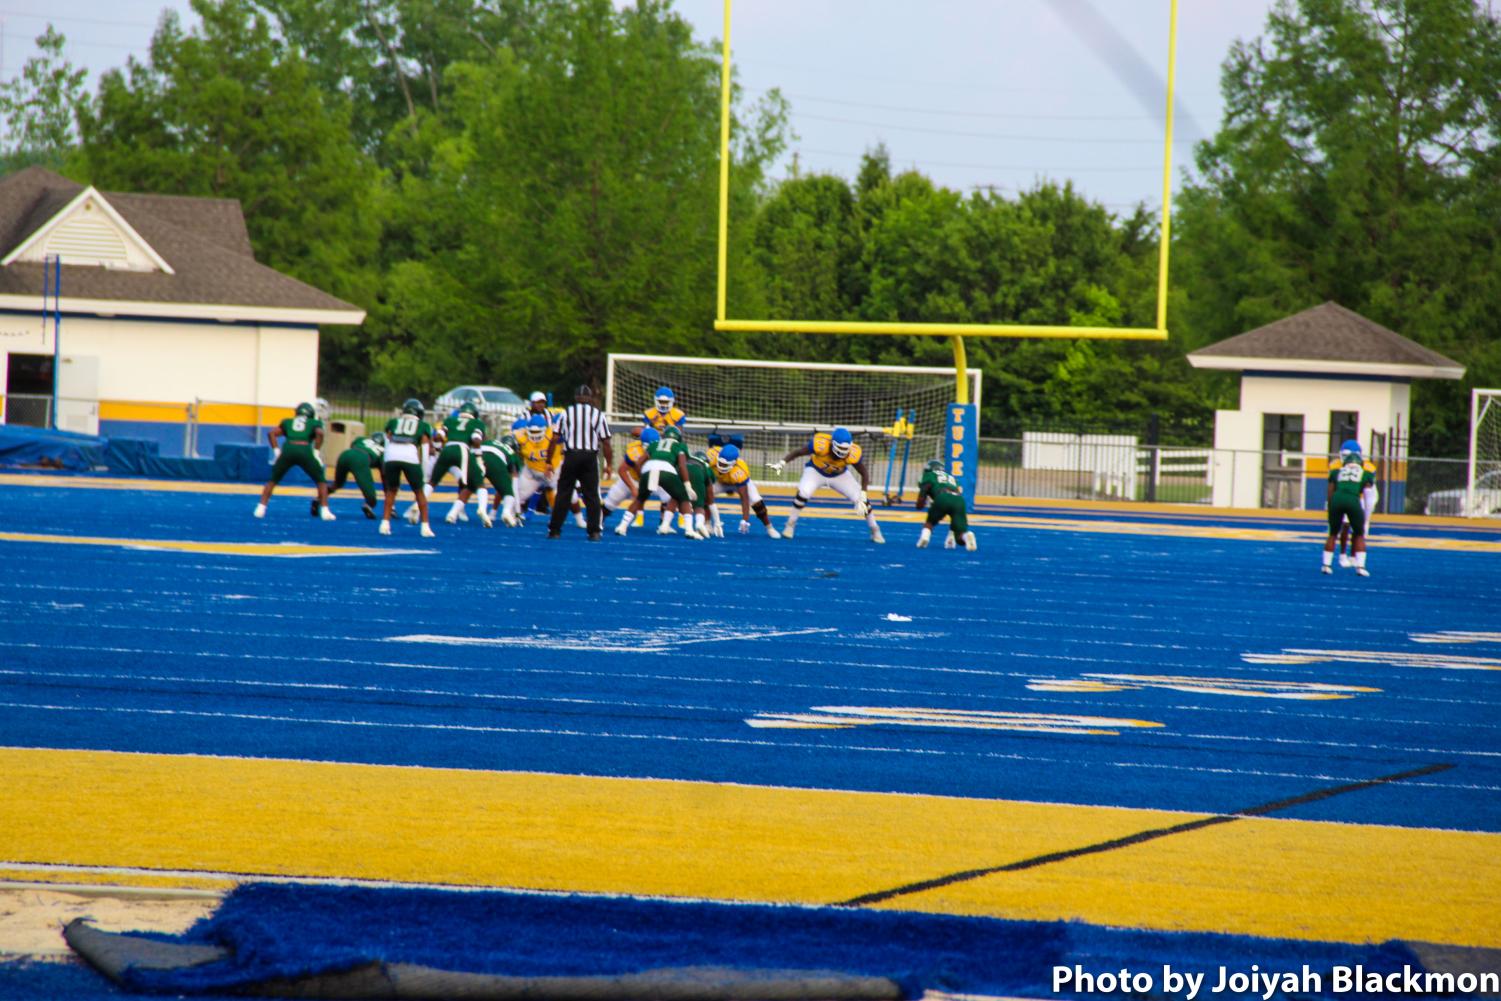 Spring+Game%3A+Tupelo+Football+vs+West+Point